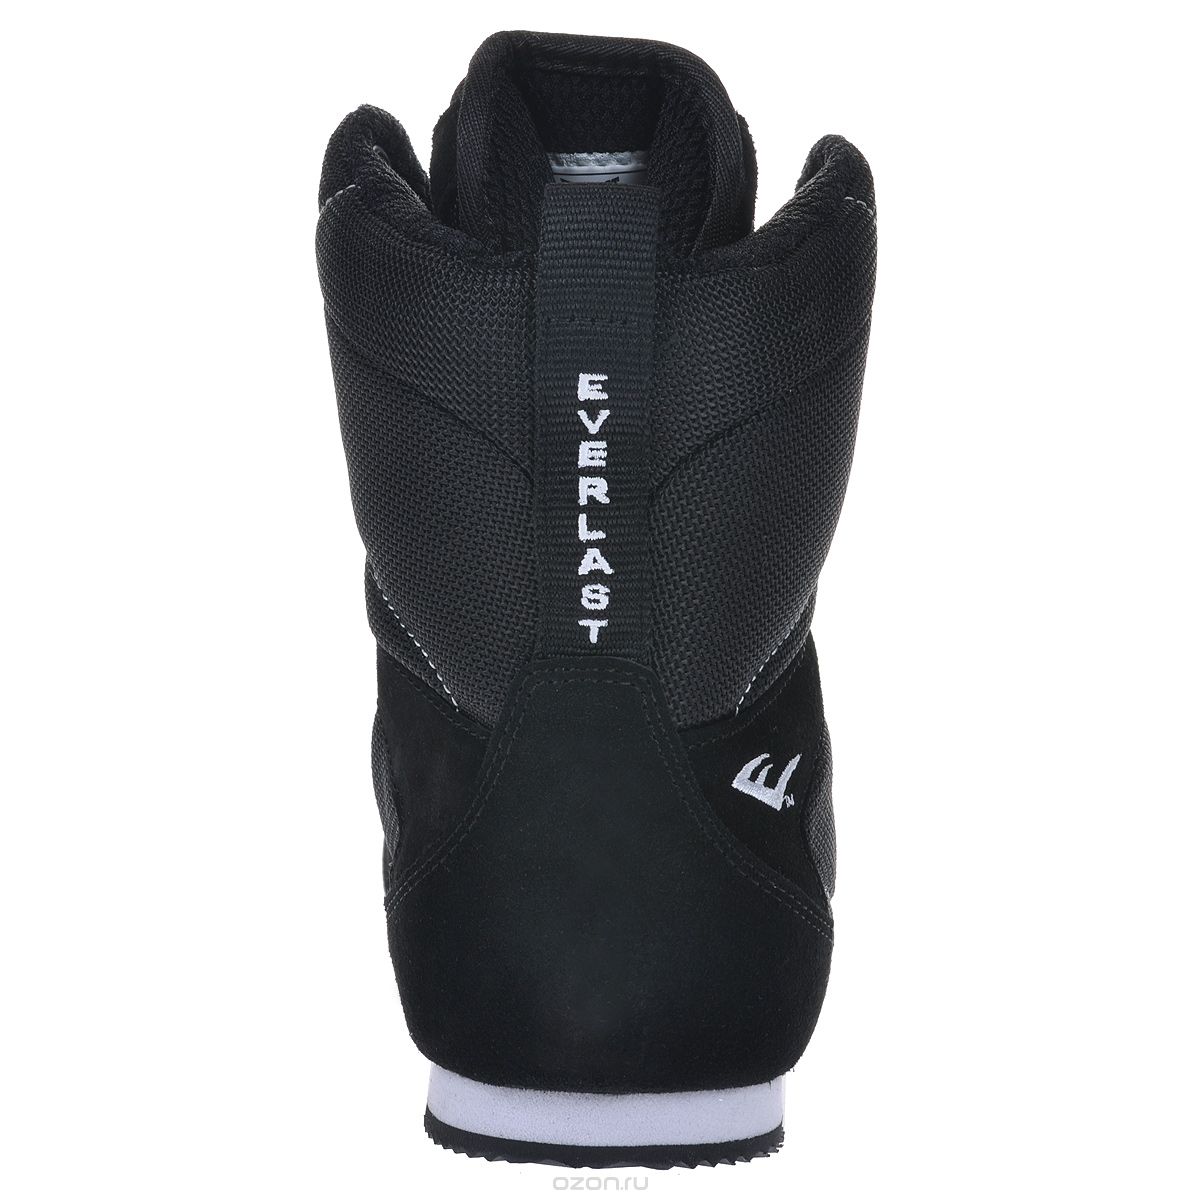  Everlast High-Top Competition,  11 (RUS 43,5), : . 527 11 BK